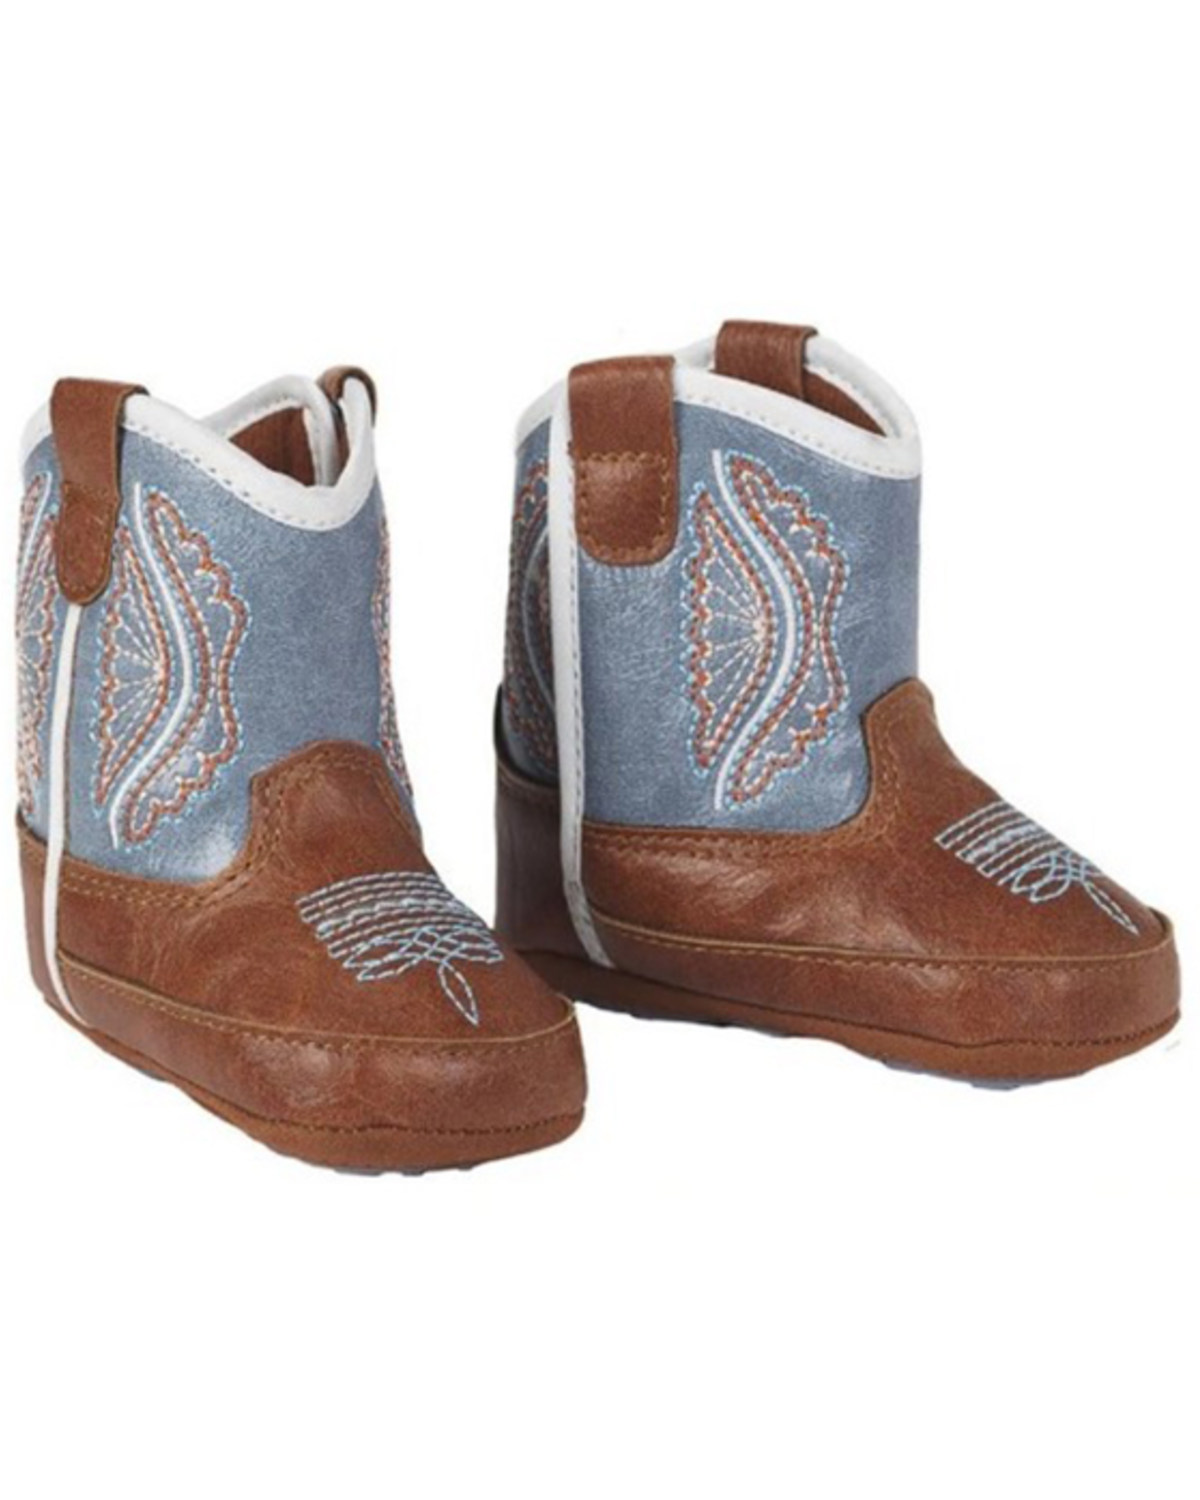 Ariat Infant-Girls Lil Stomper Shelby Western Boots